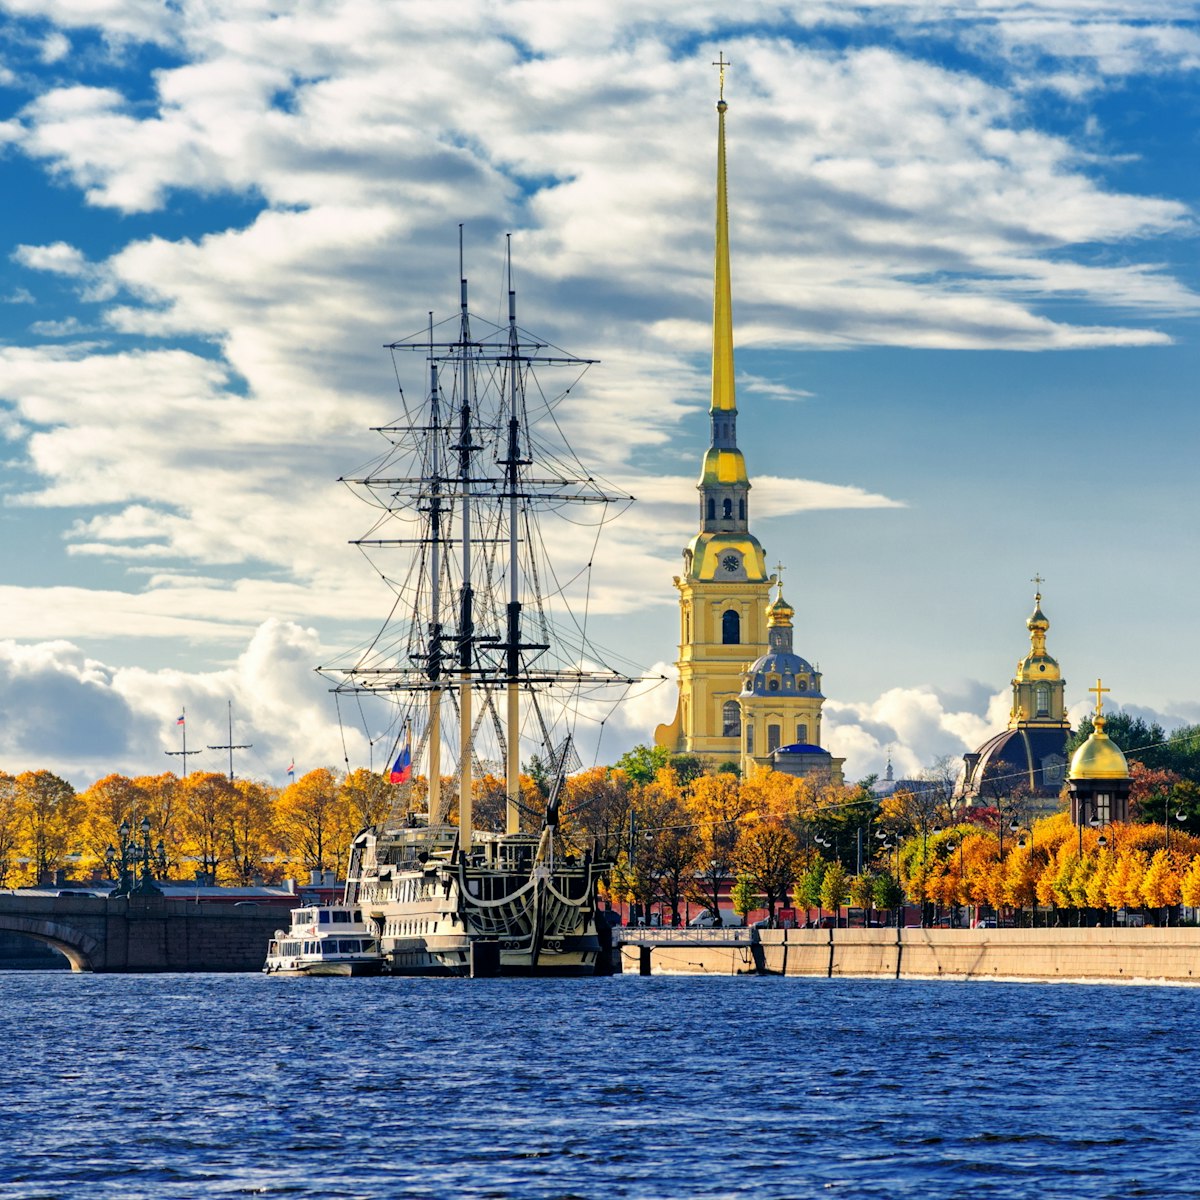 St Petersburg, Russia. Sailing ship anchored by the Peter and Paul Fortress.; Shutterstock ID 161765633; Your name (First / Last): Brana V; GL account no.: 65050; Netsuite department name: Online Editorial; Full Product or Project name including edition: destination page images